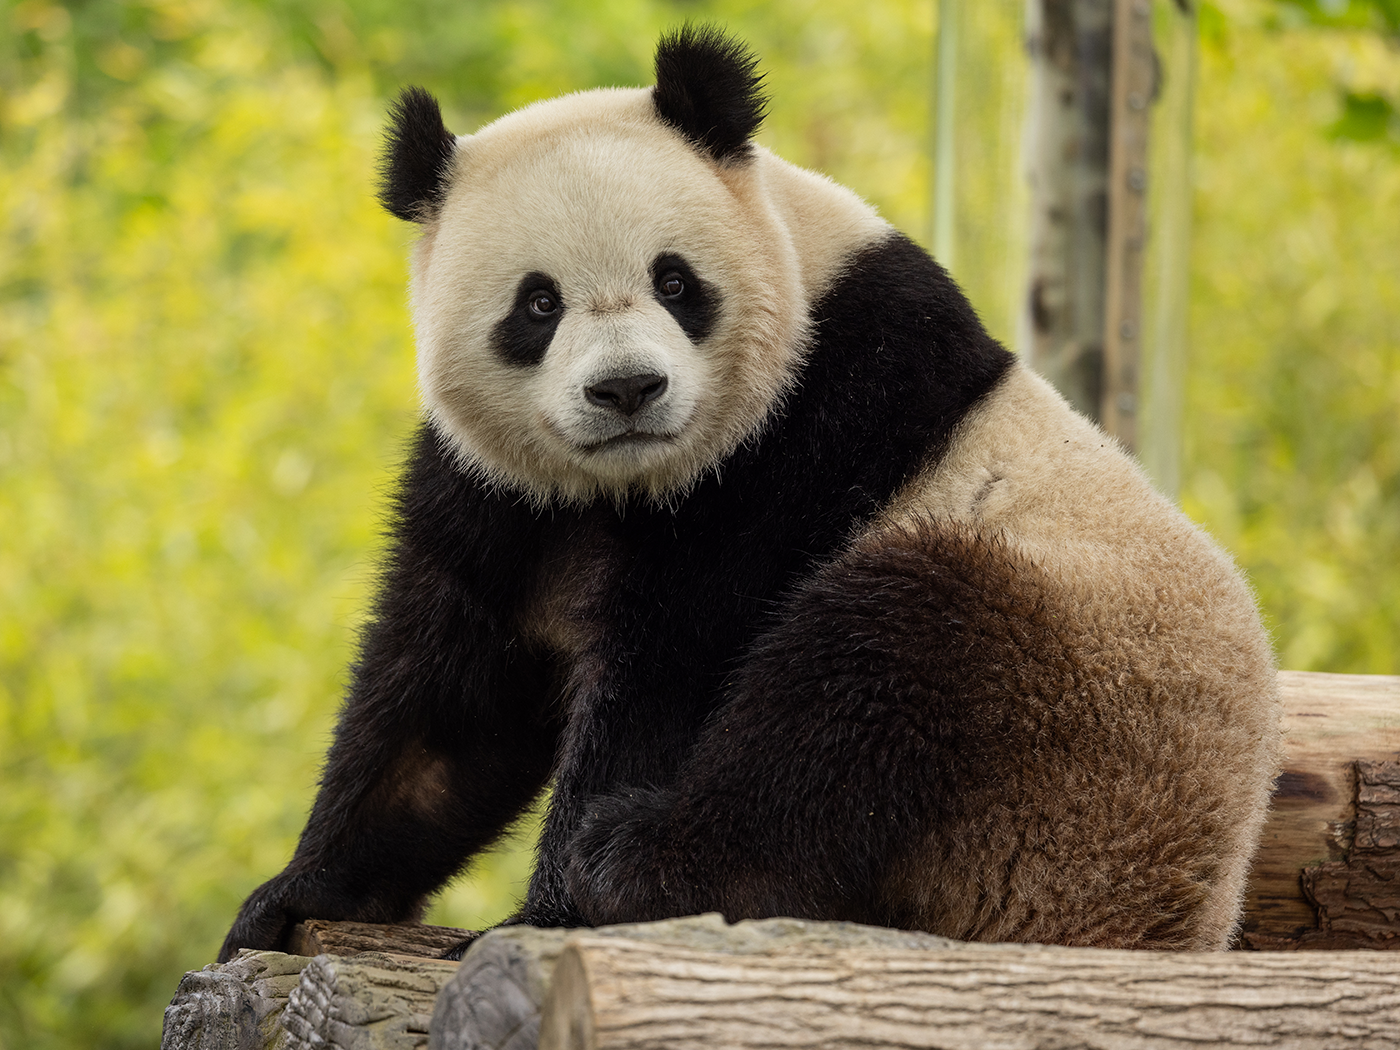 A male panda looks towards the camera while sitting on logs with his front paws in front of him